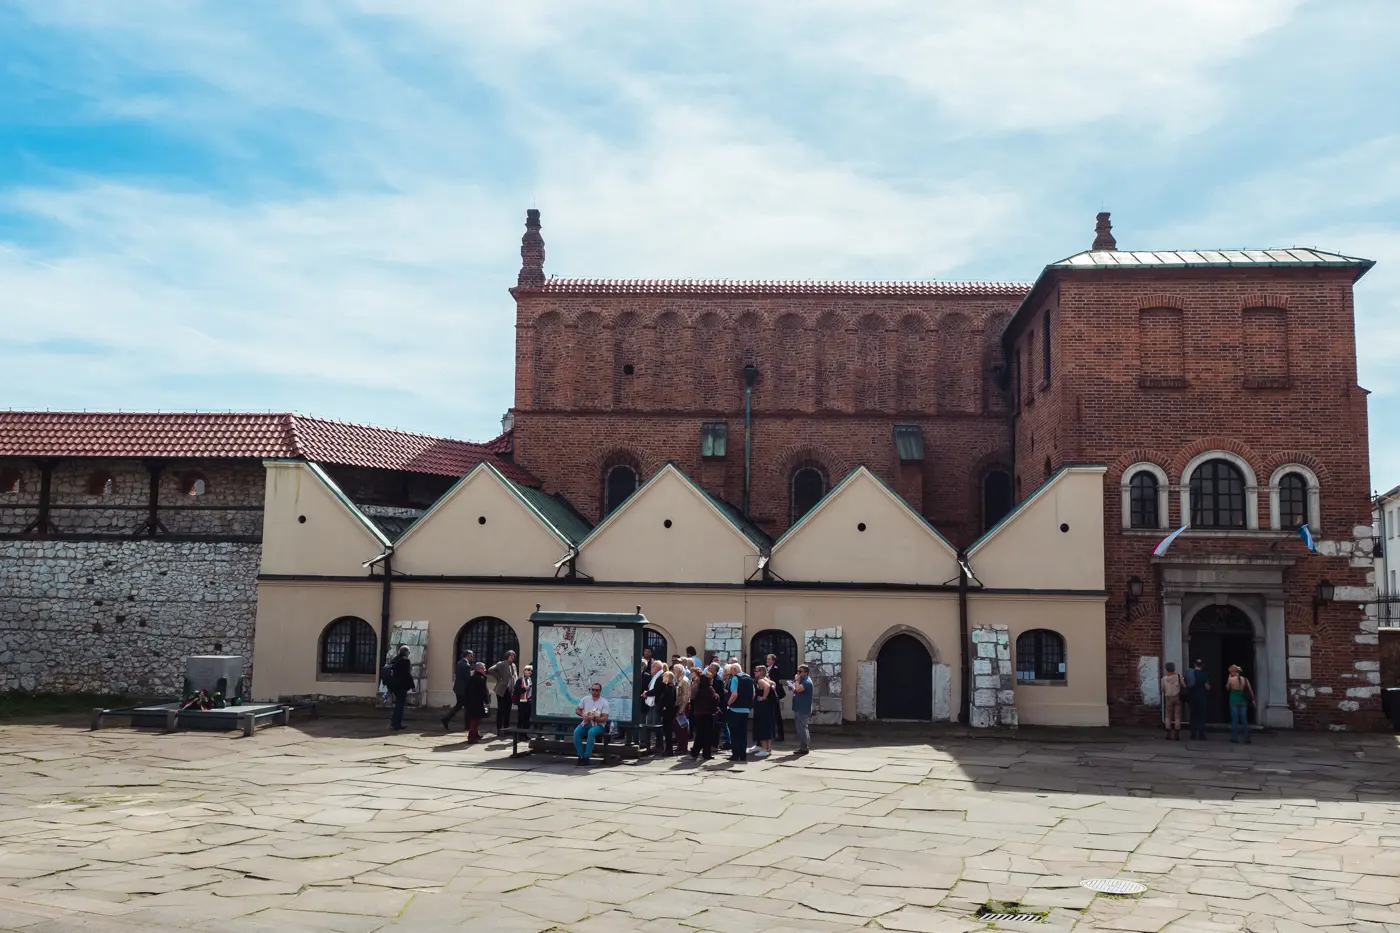 Group of people looking at a map outside the Old Synagogue made from red brick in Kazimierz Krakow on a sunny day.